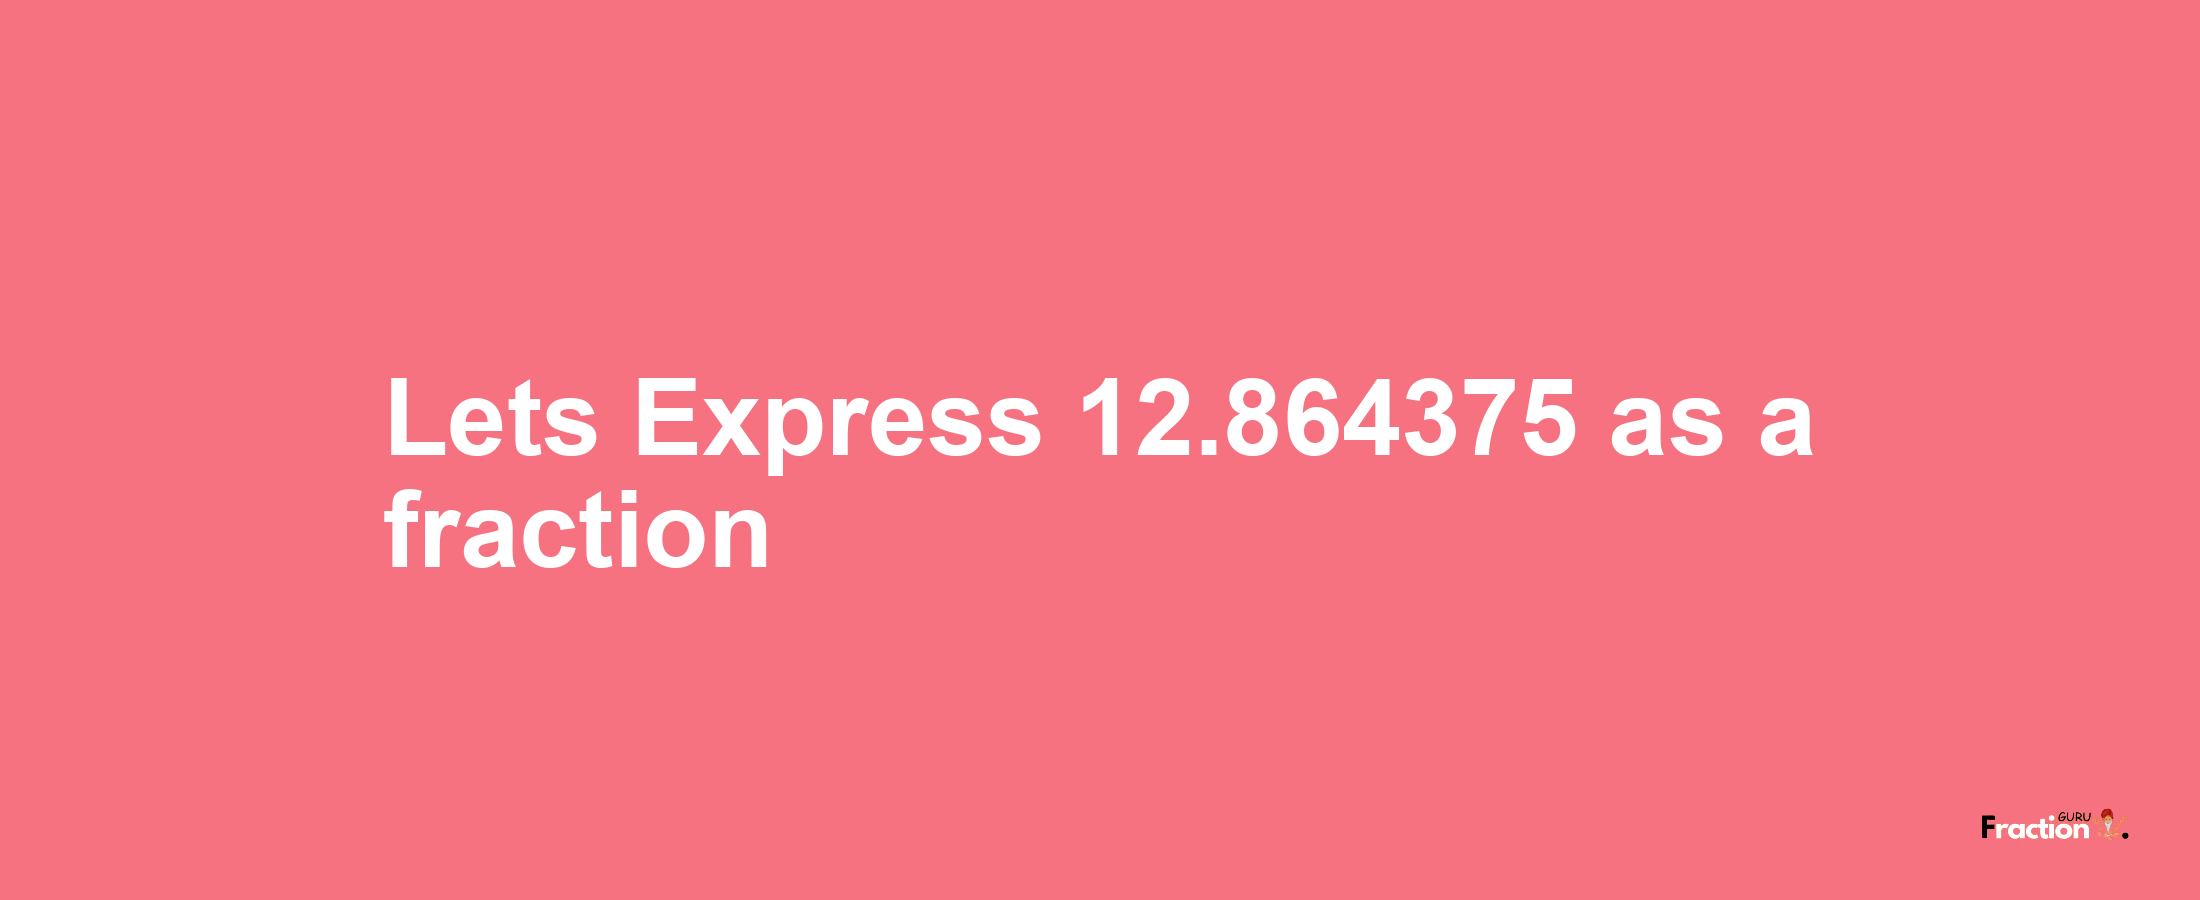 Lets Express 12.864375 as afraction